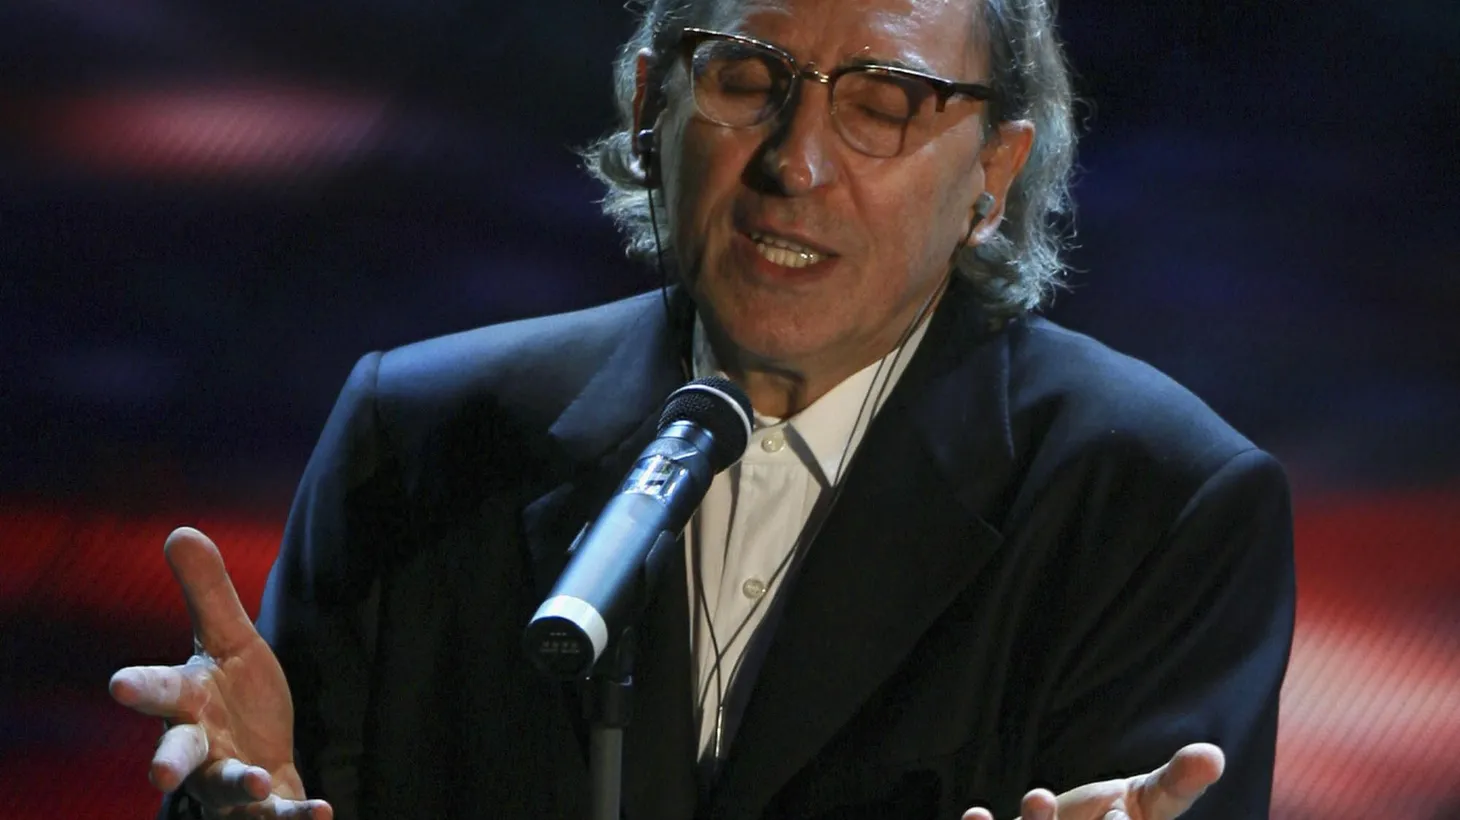 Italian artist Franco Battiato is a renowned mystical composer, a modern filmmaker and painter. He comes to the U.S. for a very rare appearance as part of the Italian cultural festival, Hitweek L.A.. Battiato will join Morning Becomes Eclectic hosted by Tom Schnabel for a live set at 11:15am.